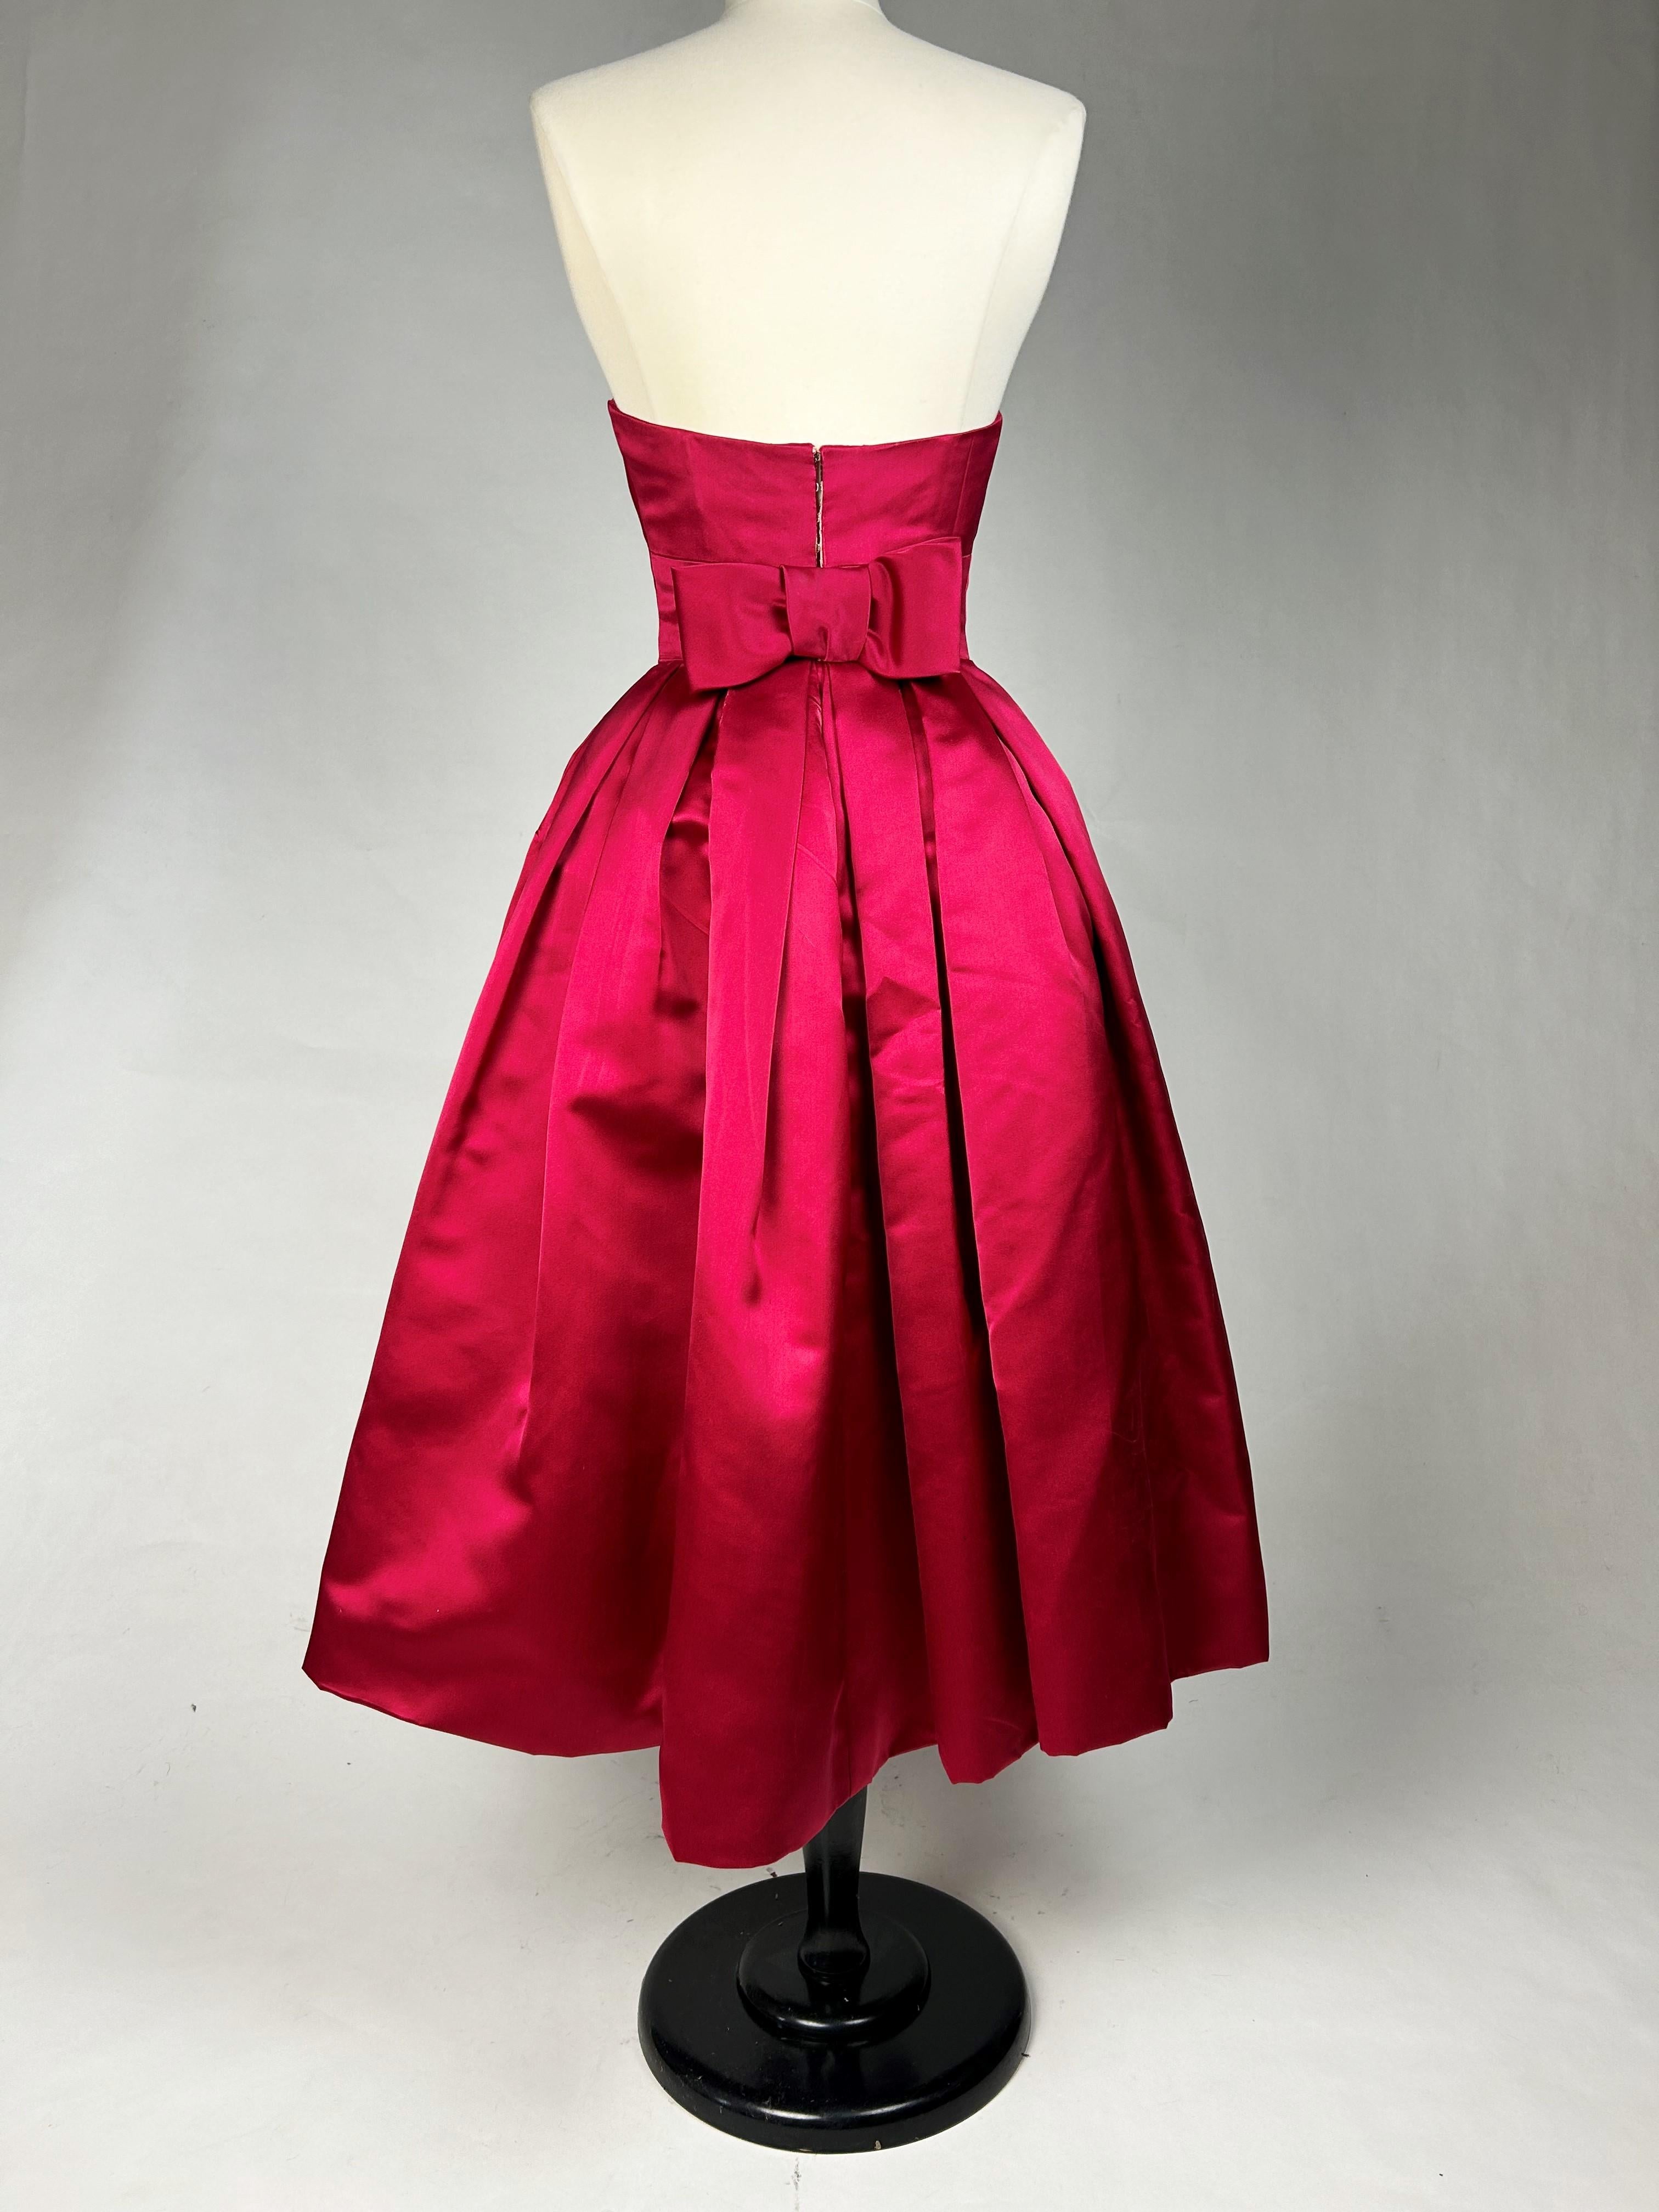 Cocktail dress in raspberry satin in the style of Christian Dior - Paris C. 1955 7